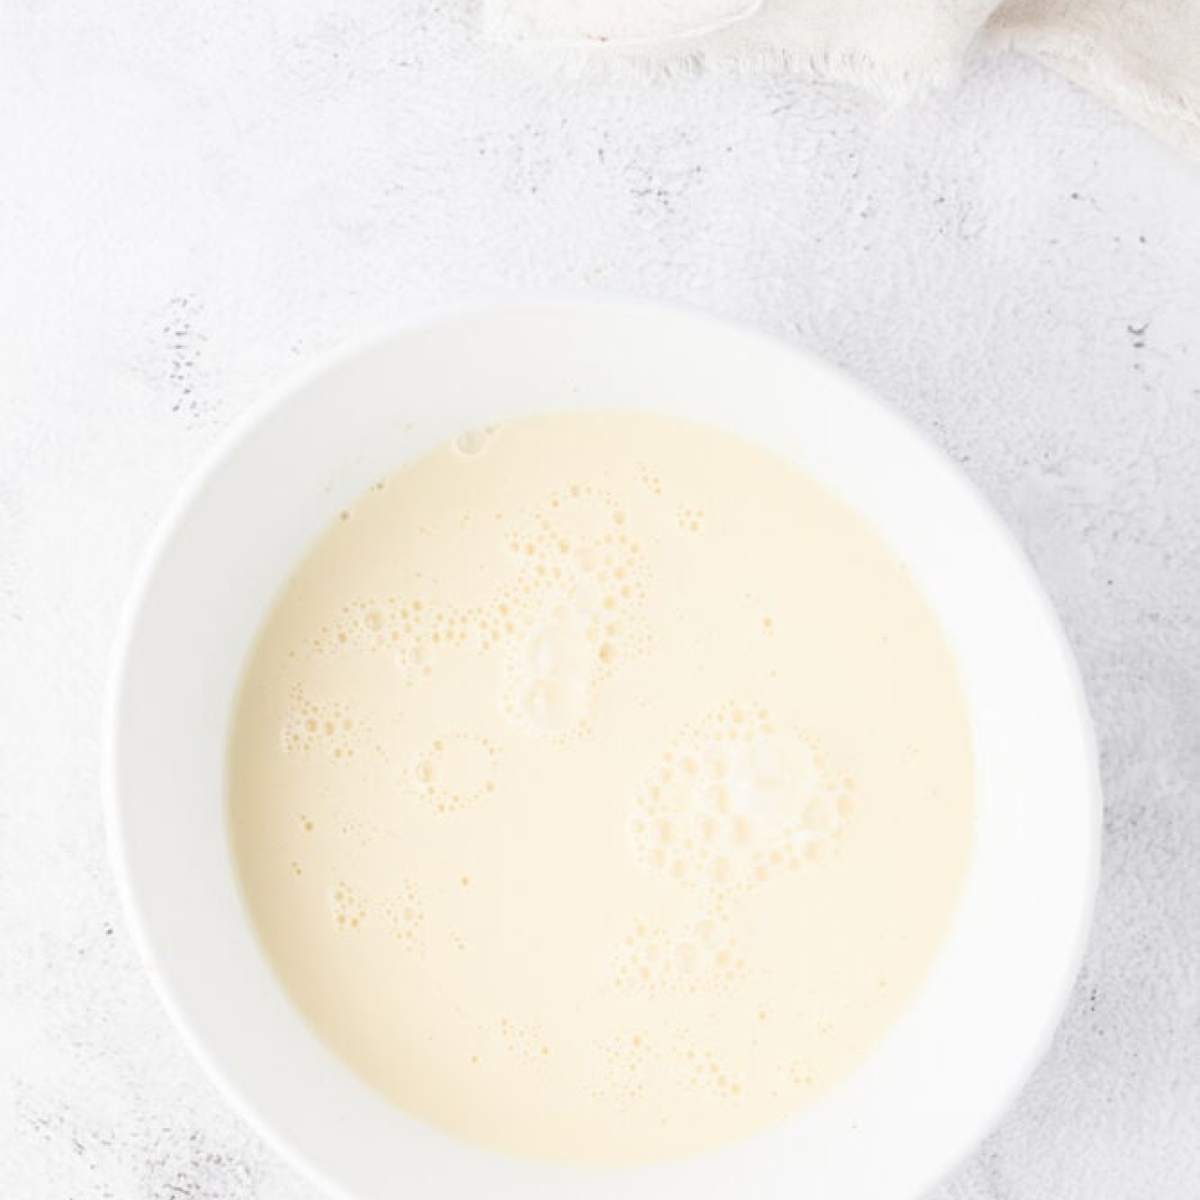 A white bowl with a white liquid in it, resembling eggnog.